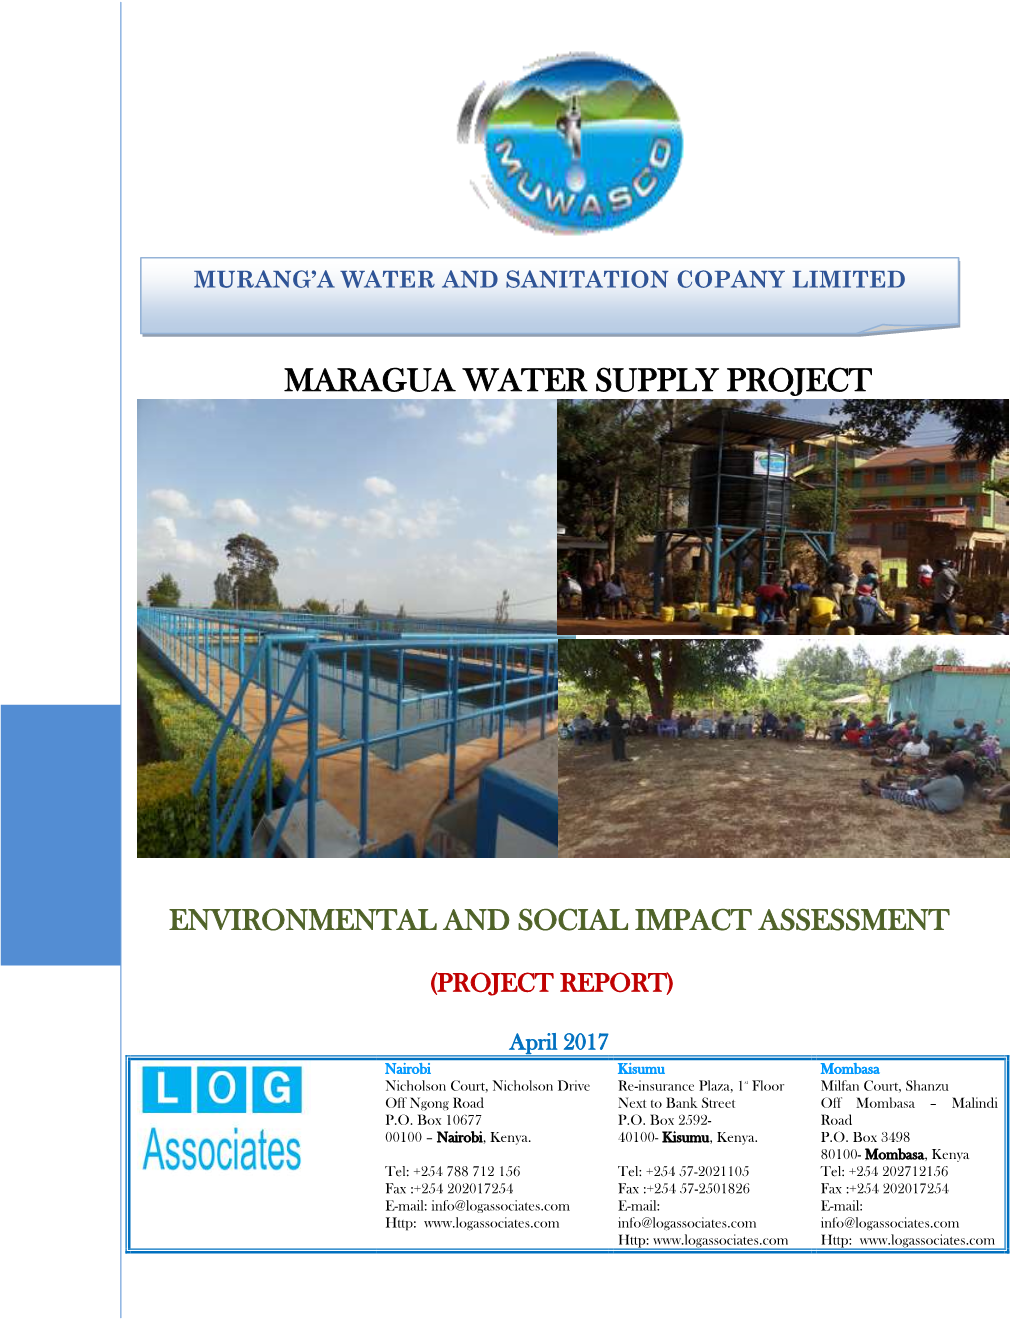 Maragua Water Supply Project